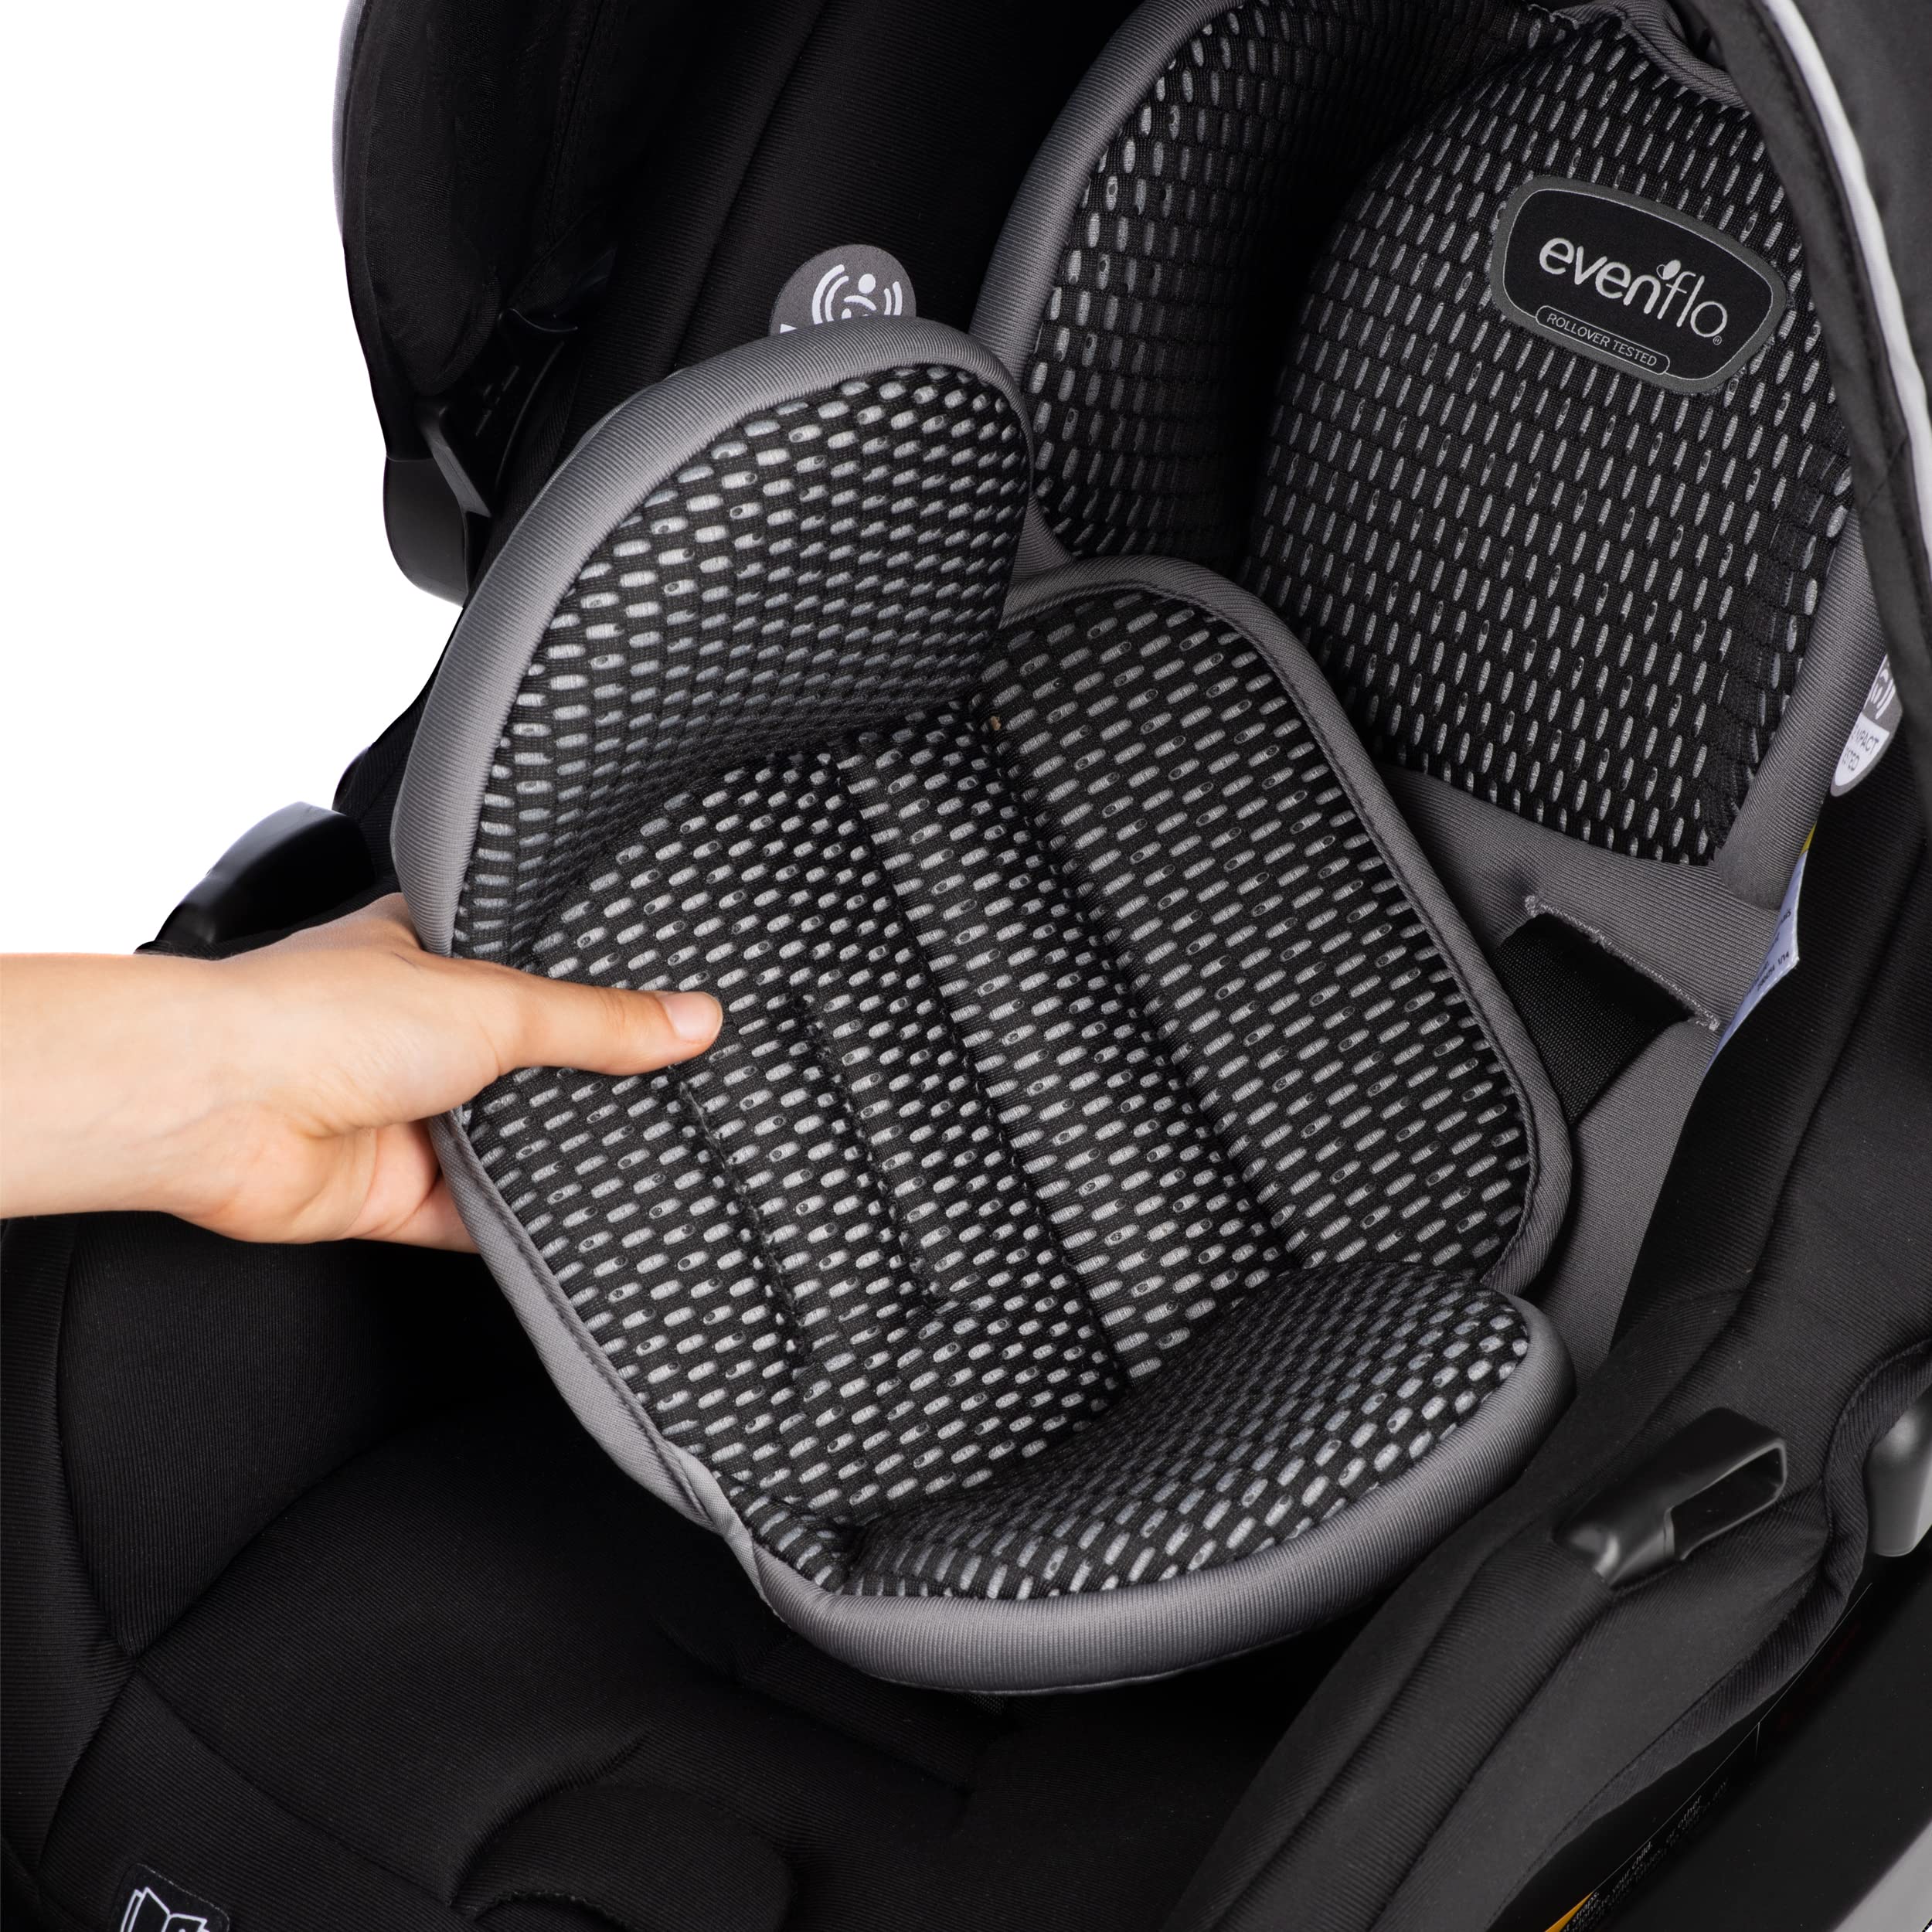 Evenflo LiteMax DLX Infant Car Seat with FreeFlow Fabric, SafeZone and Load Leg Base Black